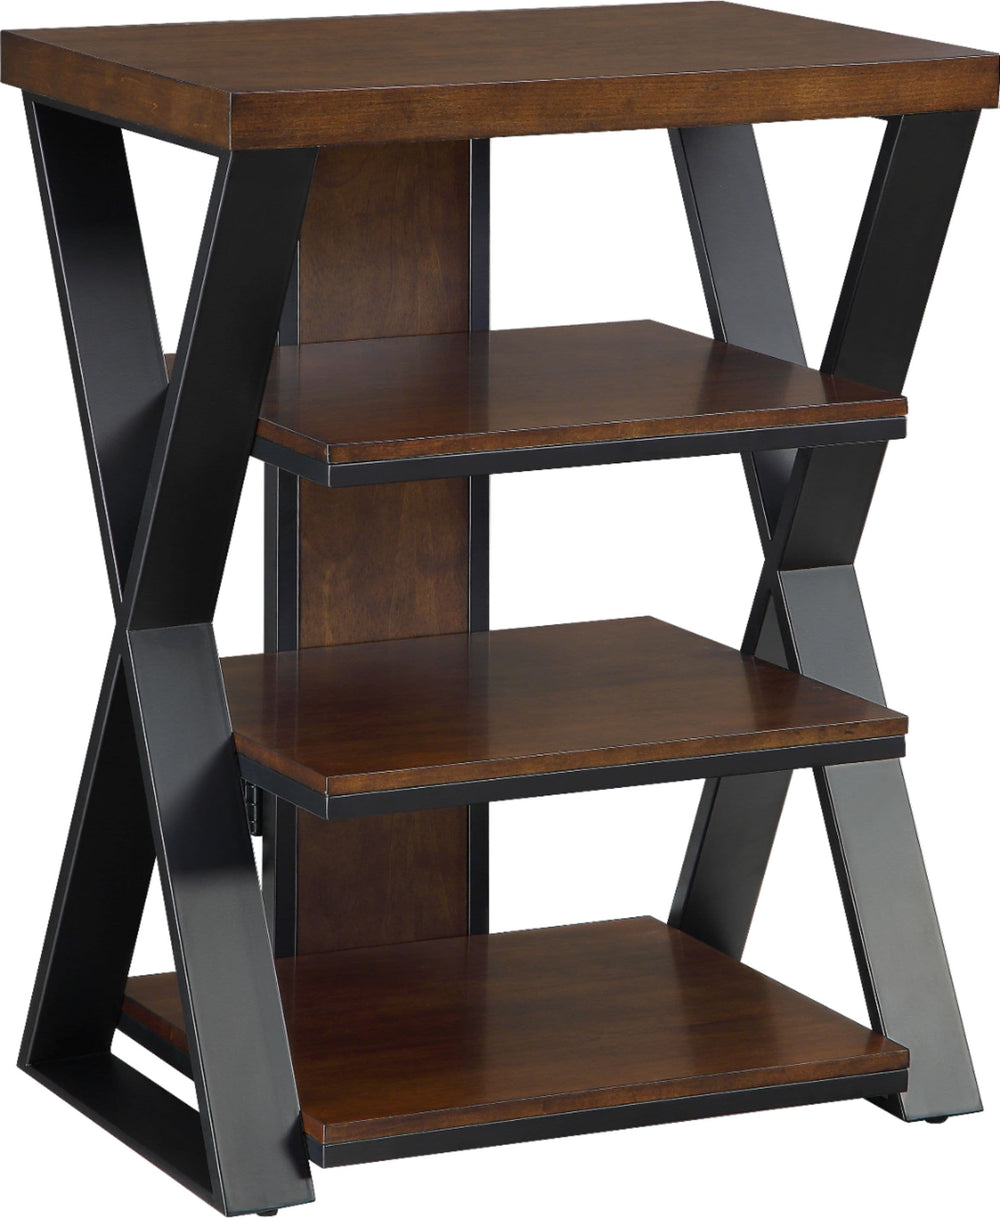 Whalen Furniture - Tower Stand for TVs Up to 32" - Medium Brown Cherry_1